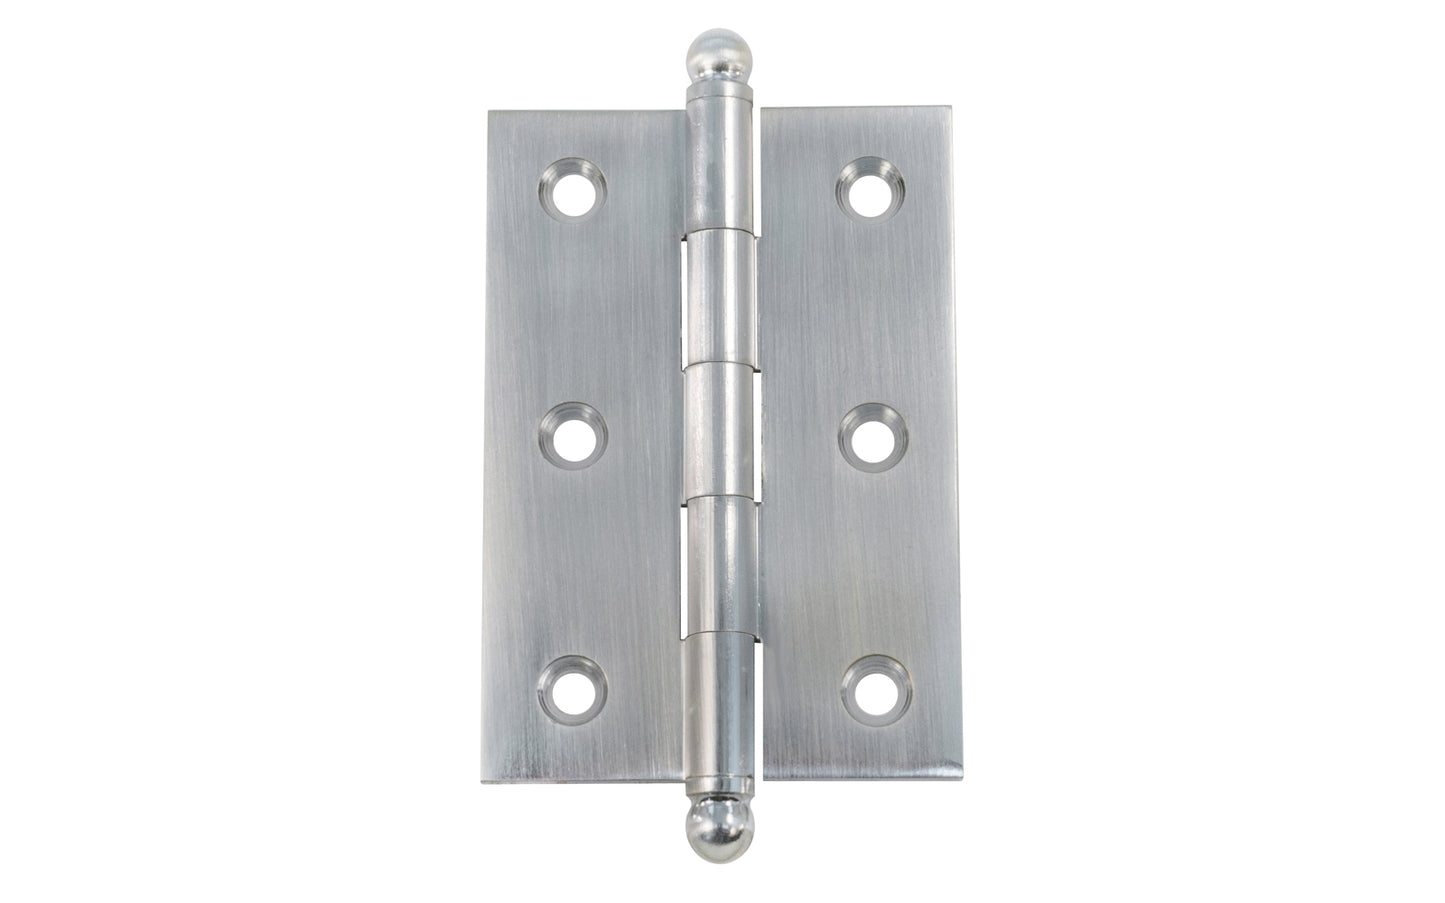 Classic Solid Brass Ball-Tip Cabinet Hinge ~ 2-1/2" x 1-3/4". Full mortise extruded hinges. 3/32" heavy duty leaf thickness gauge. Non-removable fixed hinge pin with ball tips. High quality thick cabinet hinge with ball tips. Brushed Chrome finish.